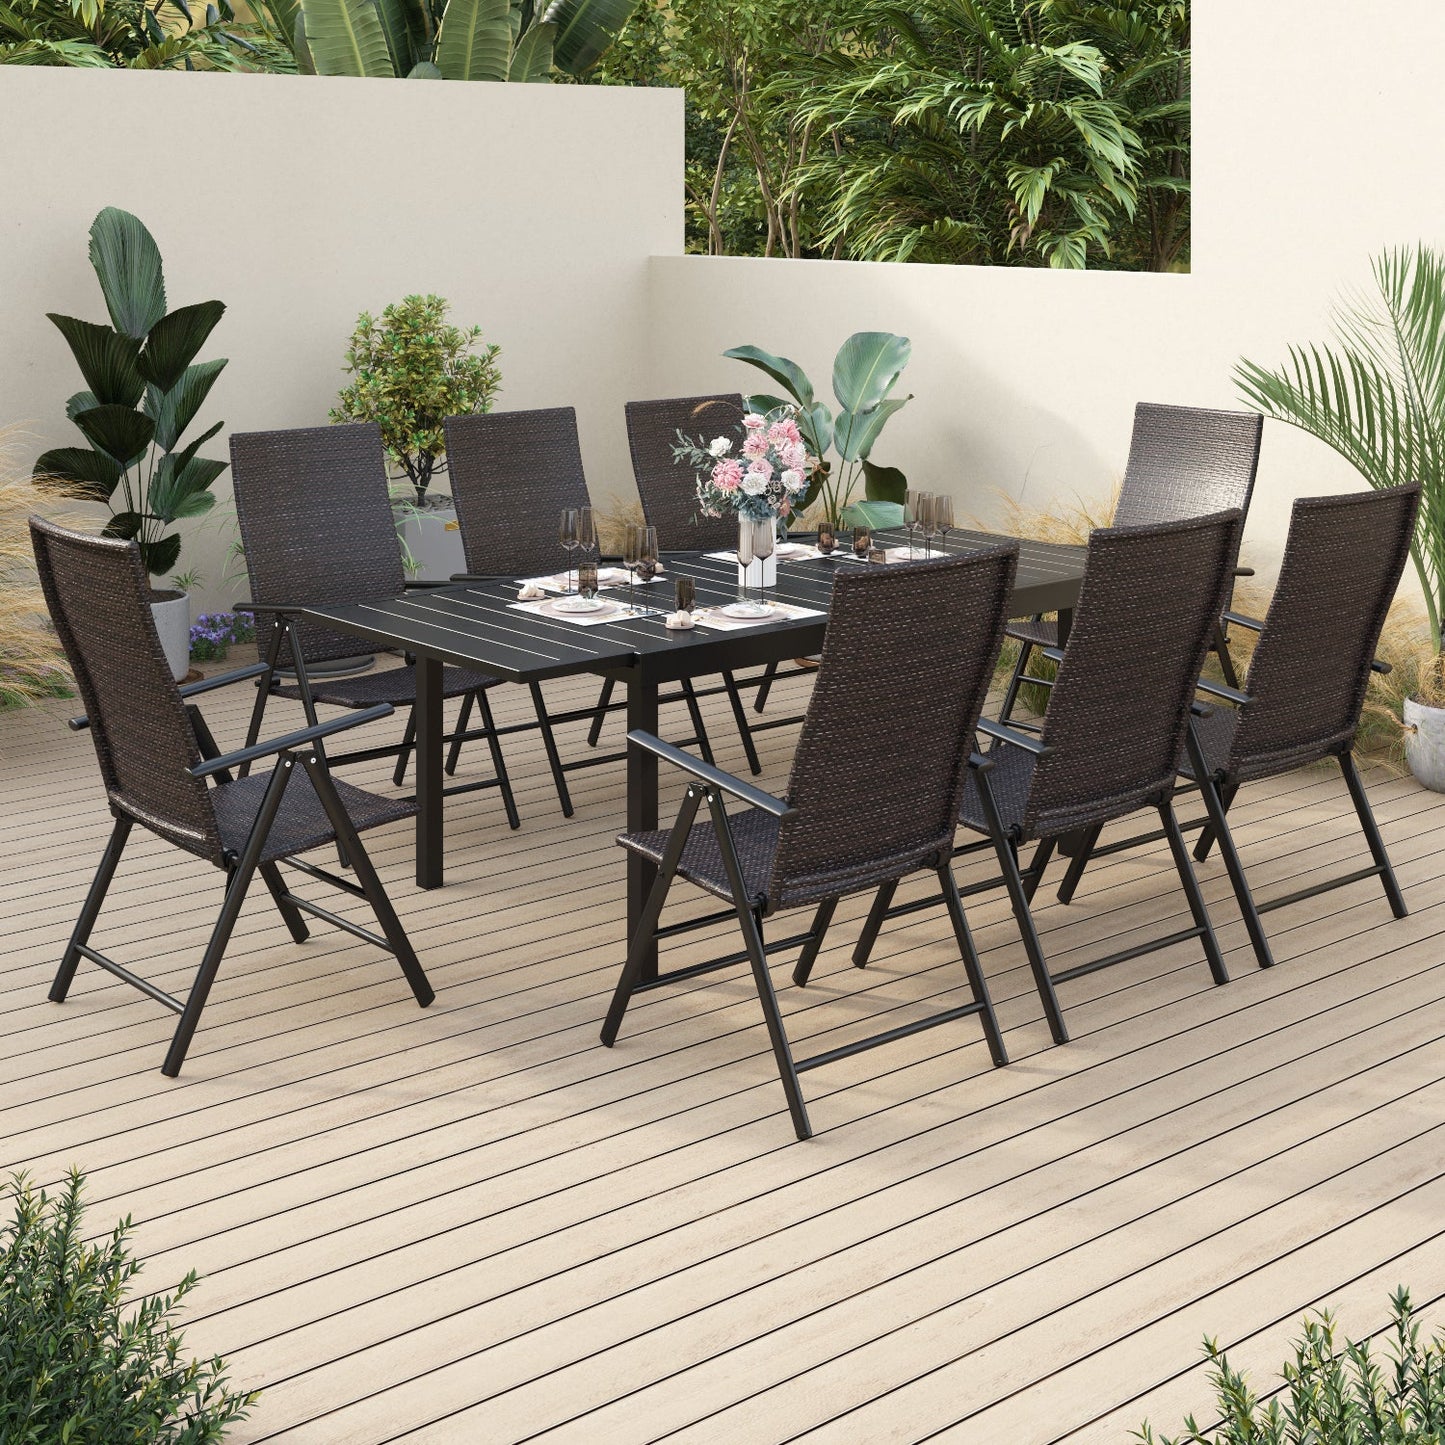 Sophia & William 9 Pieces Outdoor Patio Dining Set Foldable Adjustable PE Rattan Patio Dining Chairs and Metal Dining Table